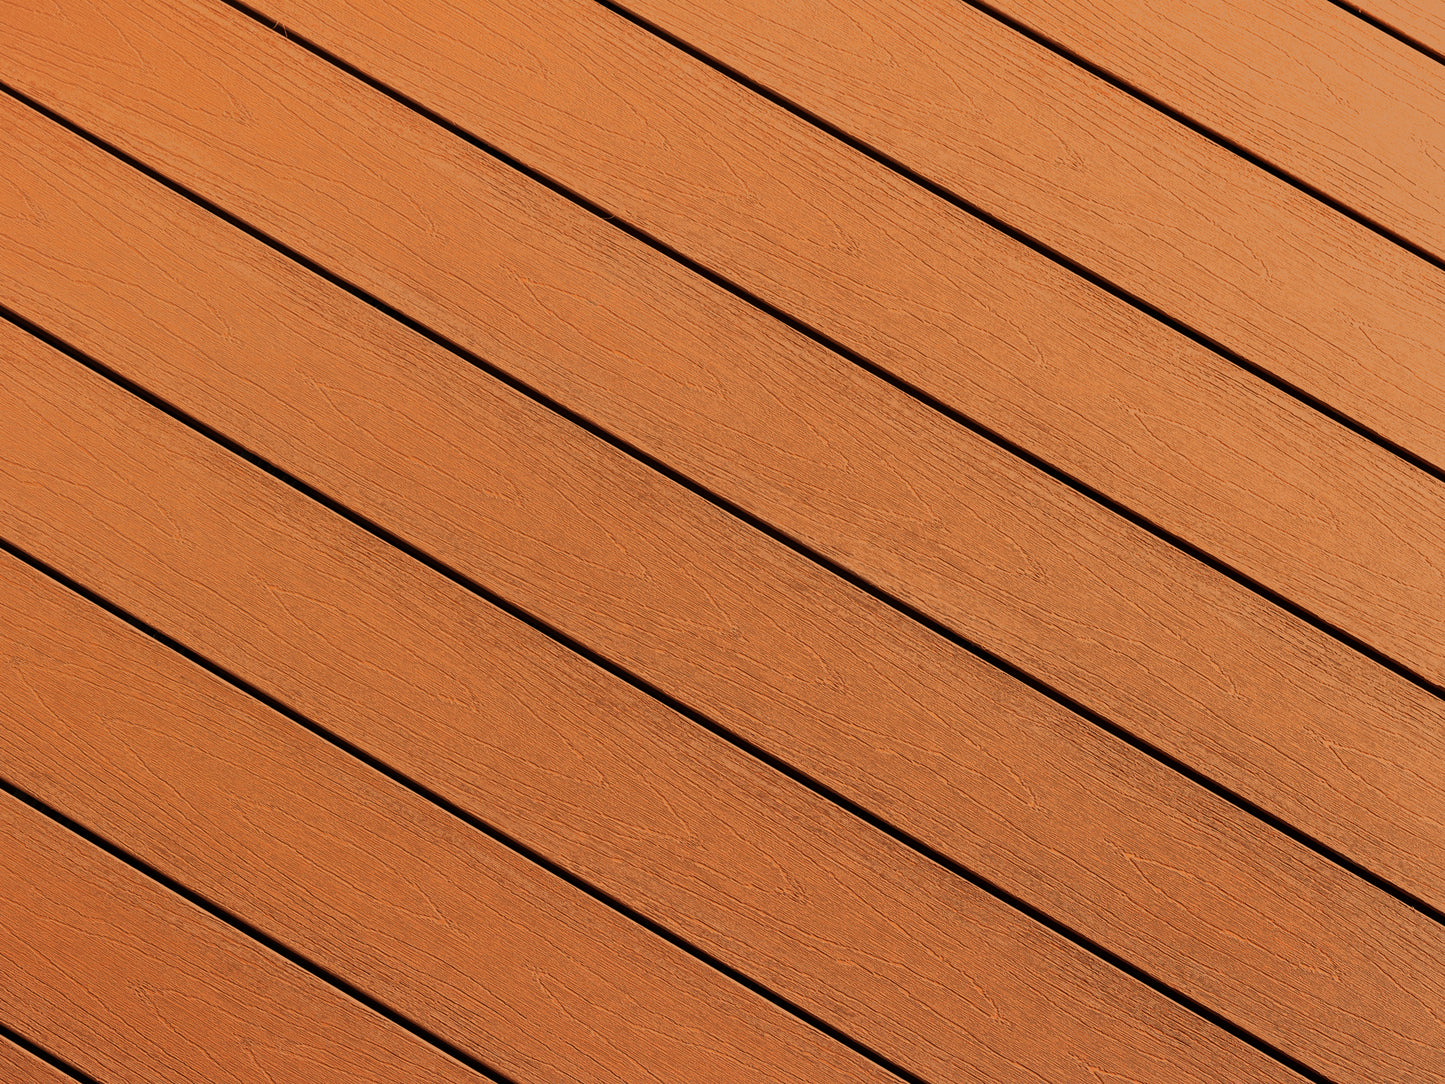 TruNorth Enviroboard Composite Decking - Gen I Solid Colours (1"x5-1/8") | from $3.08/ft